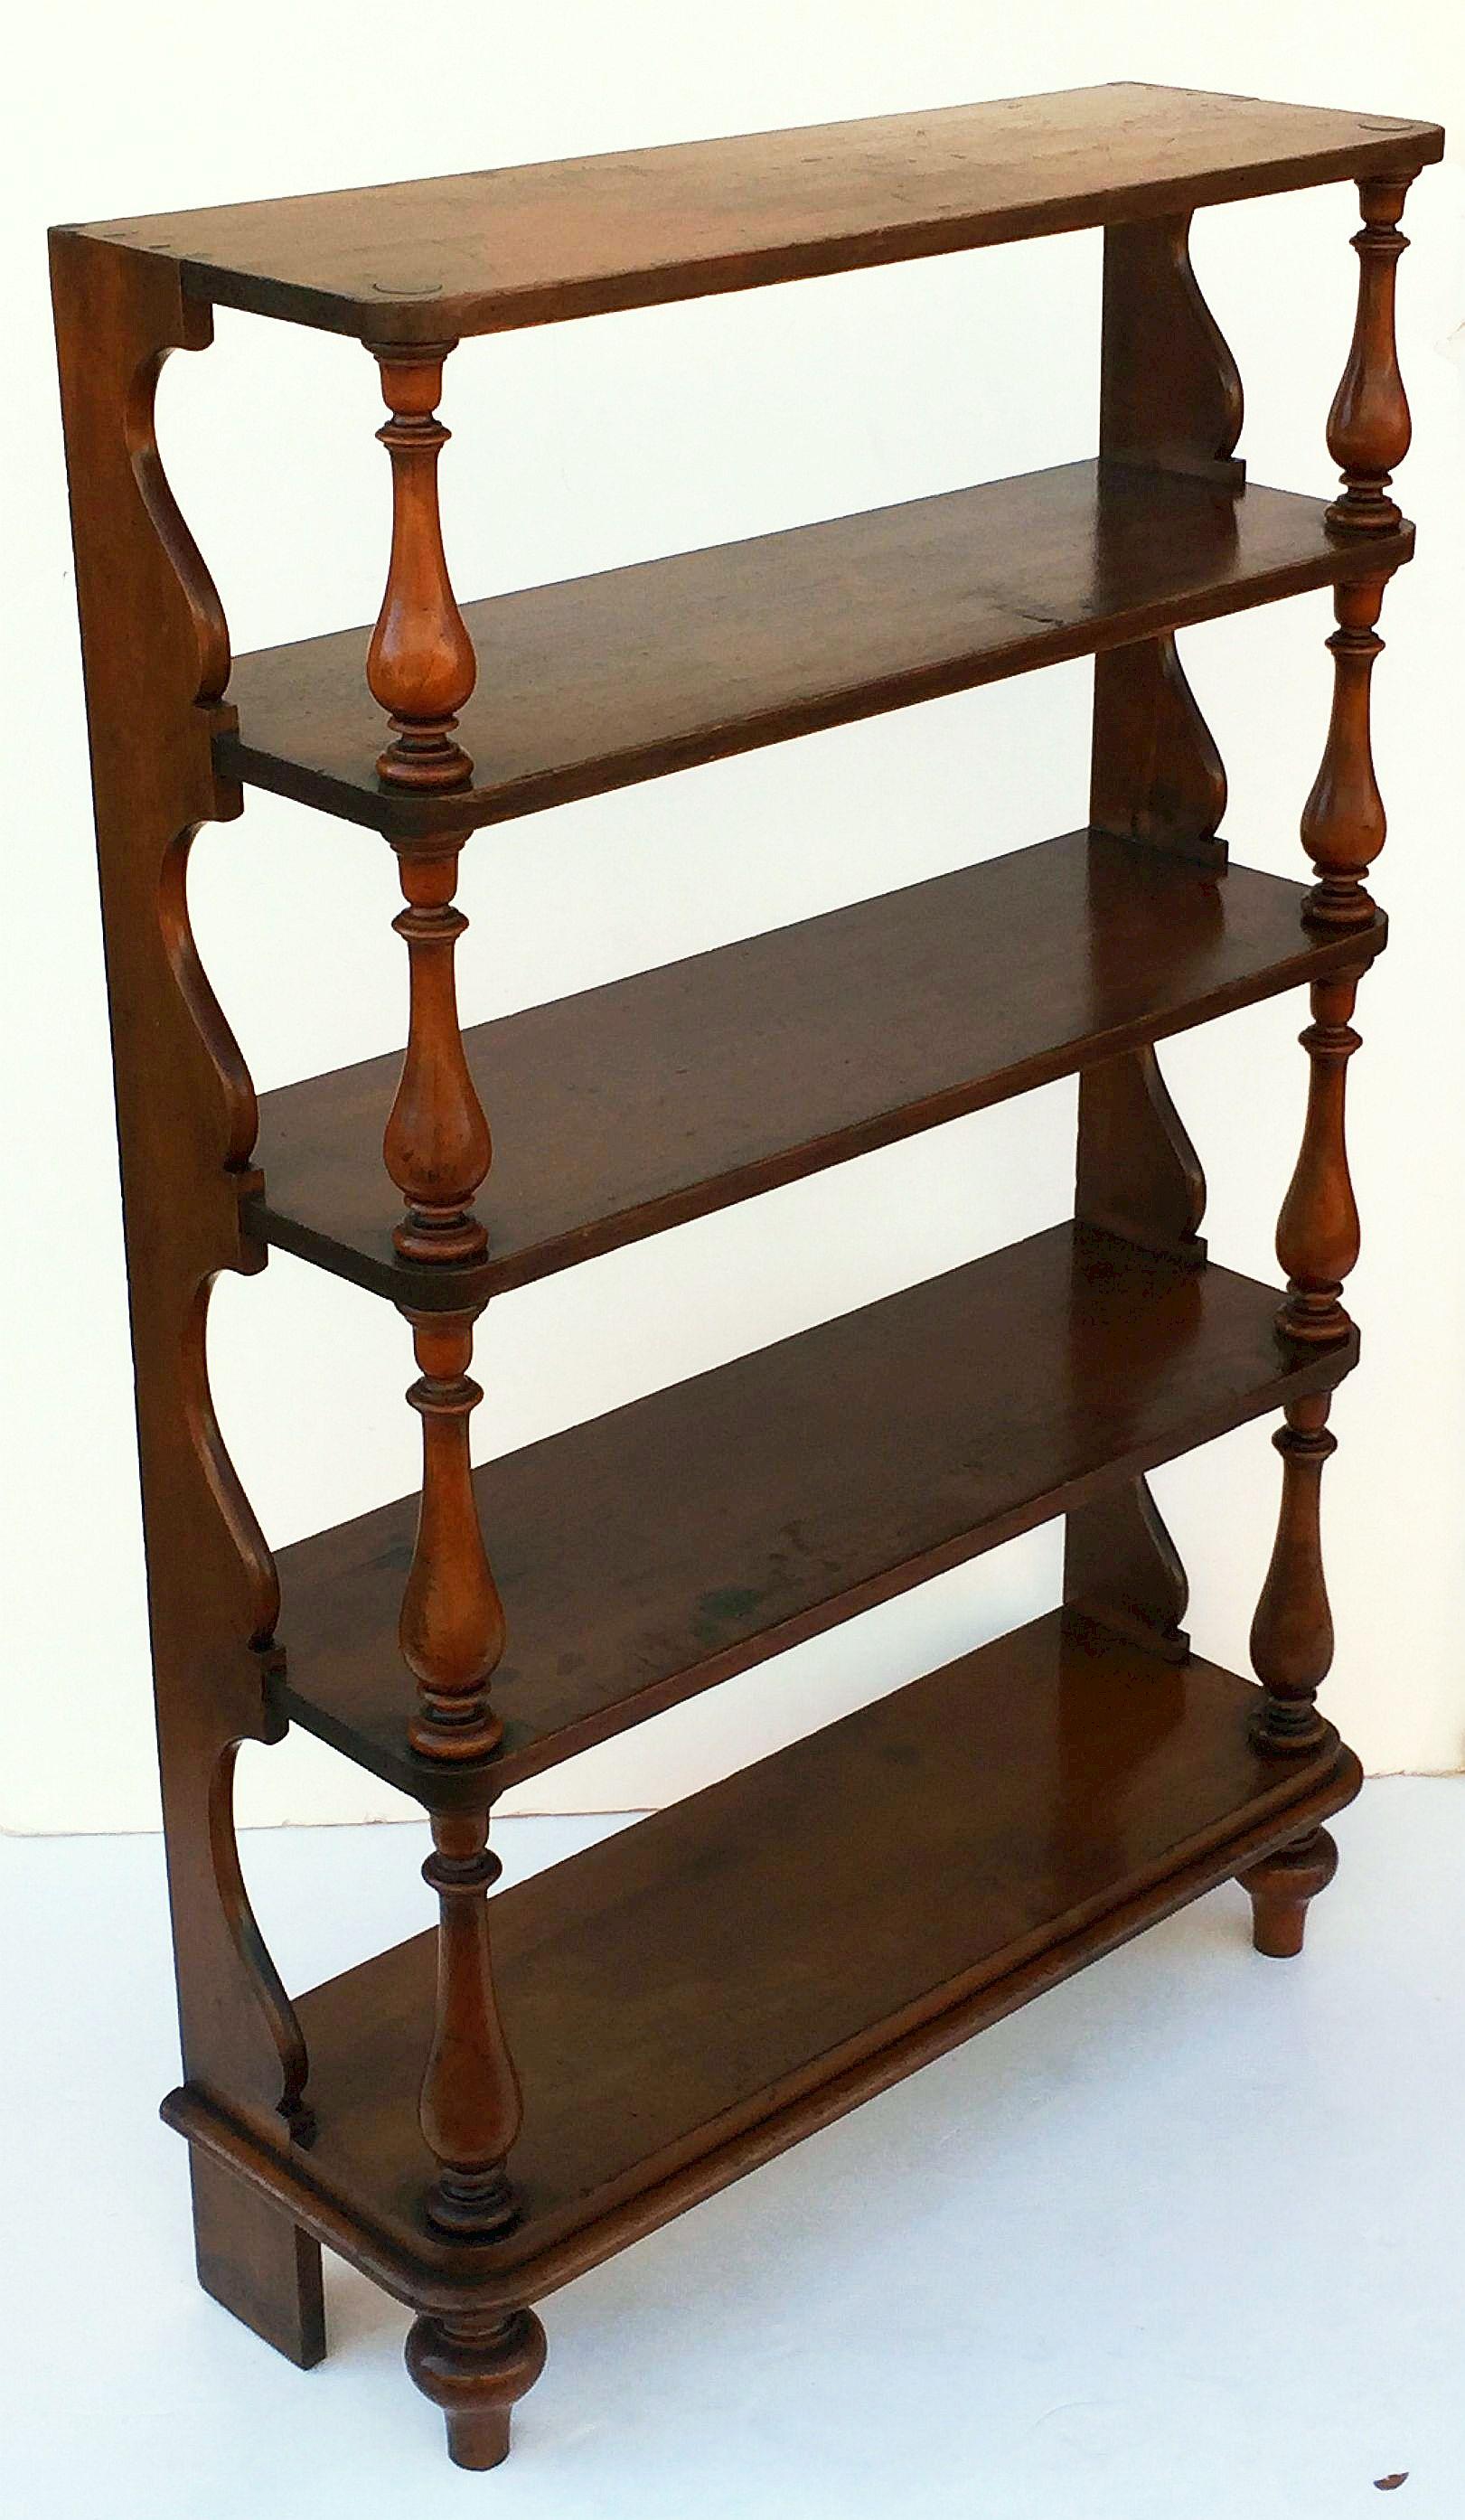 Wood Tall English Standing Shelves or Bookcase Étagère of Fruitwood